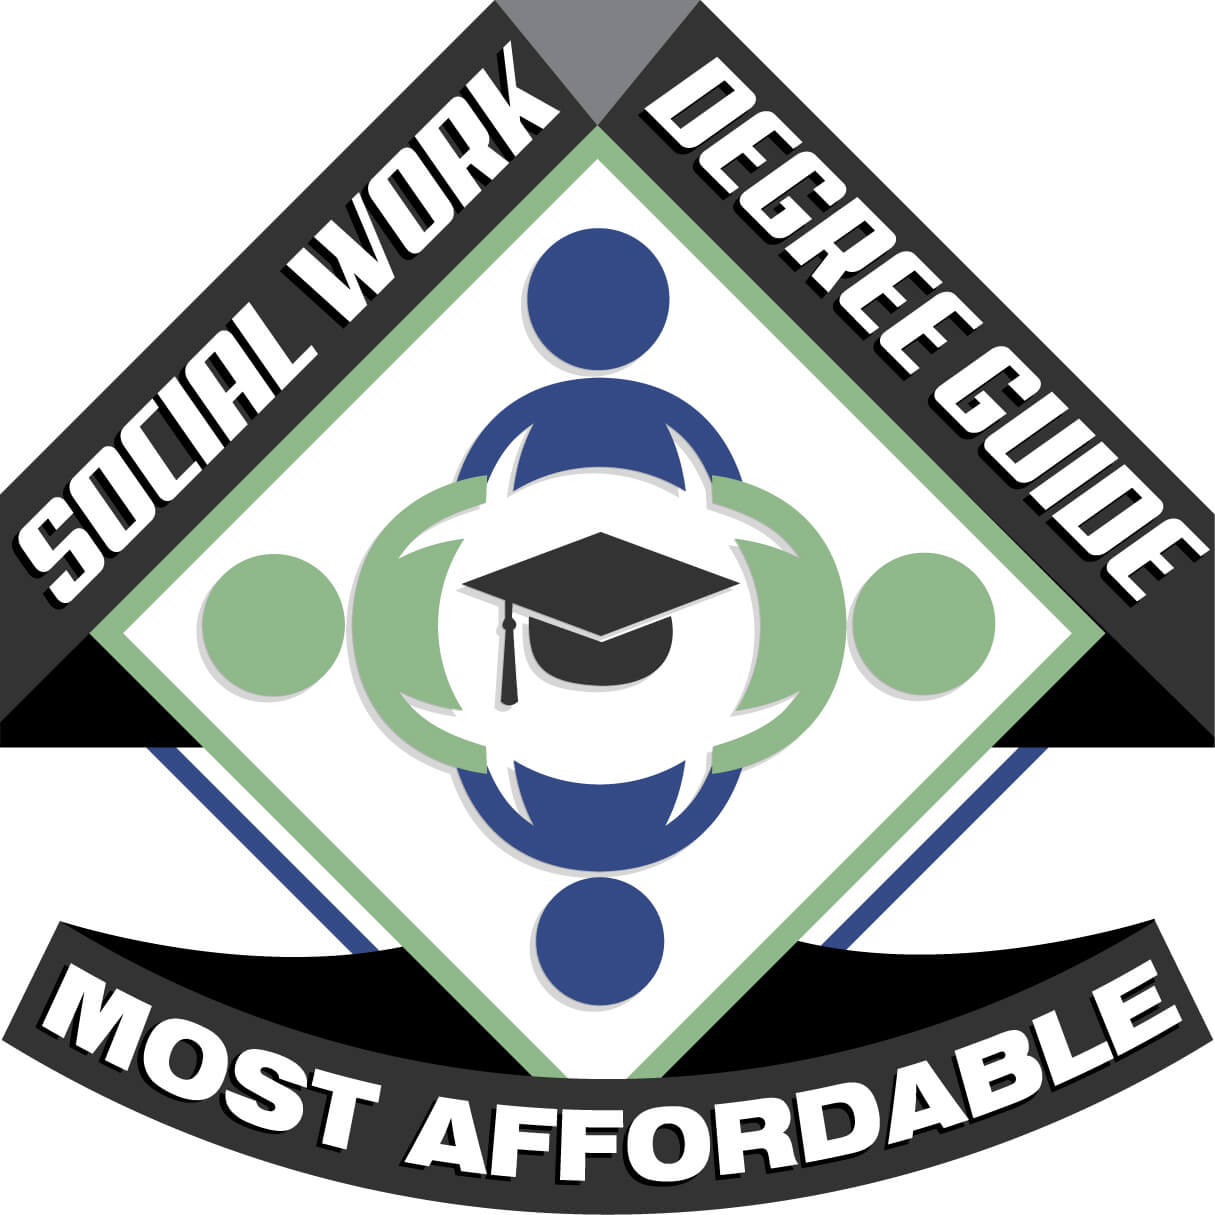 Social Work Degree Guide logo: Most Affordable